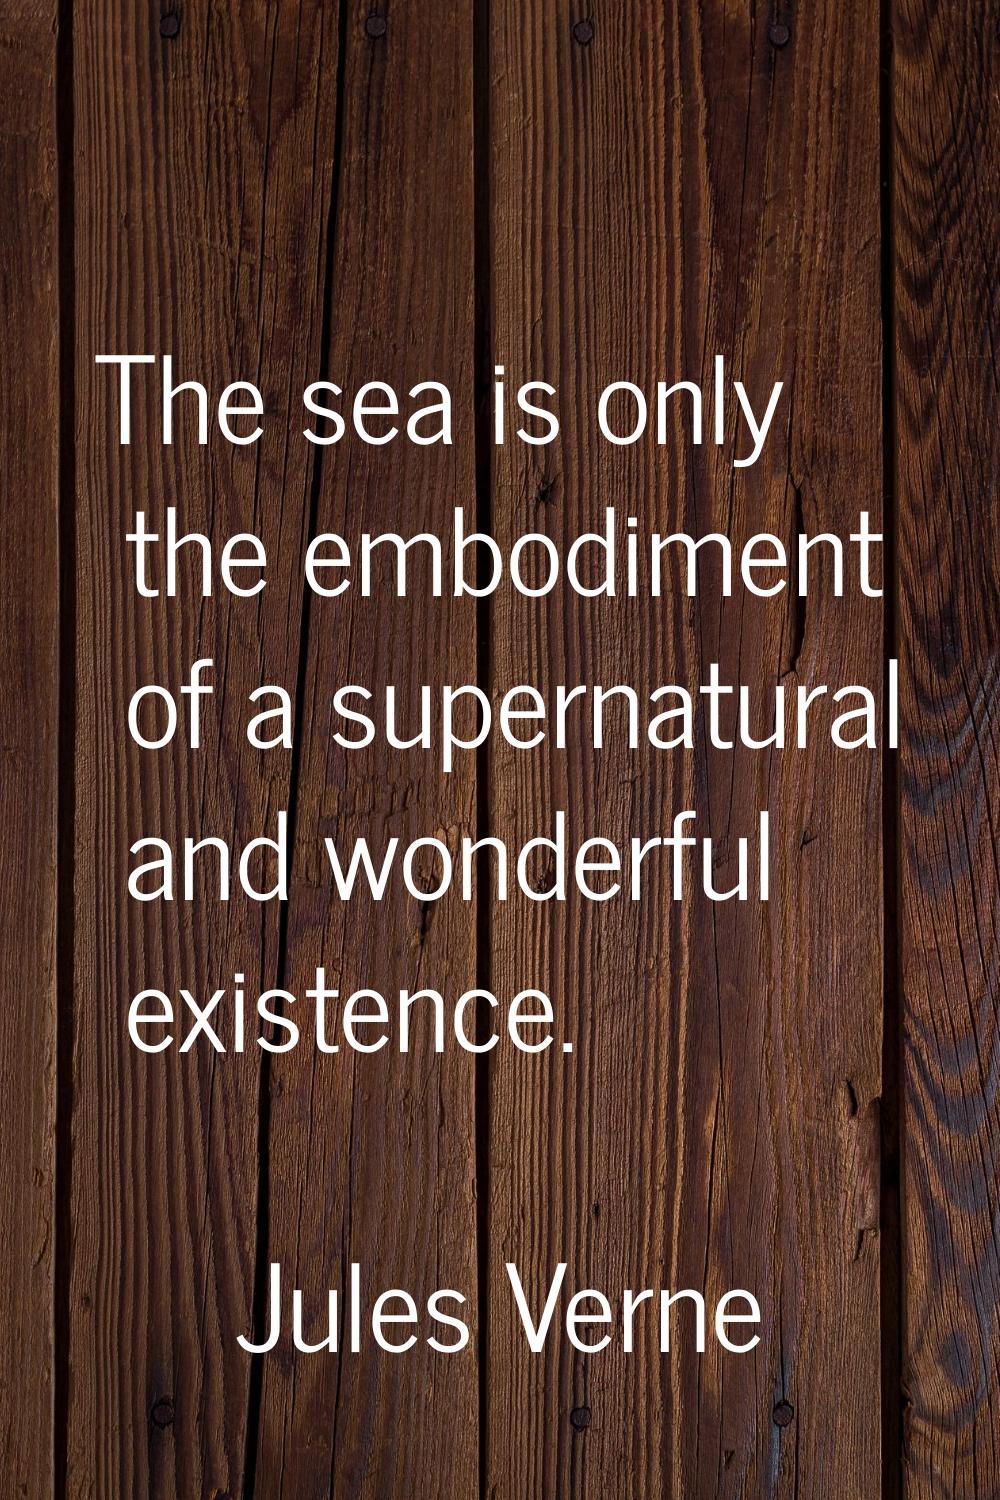 The sea is only the embodiment of a supernatural and wonderful existence.